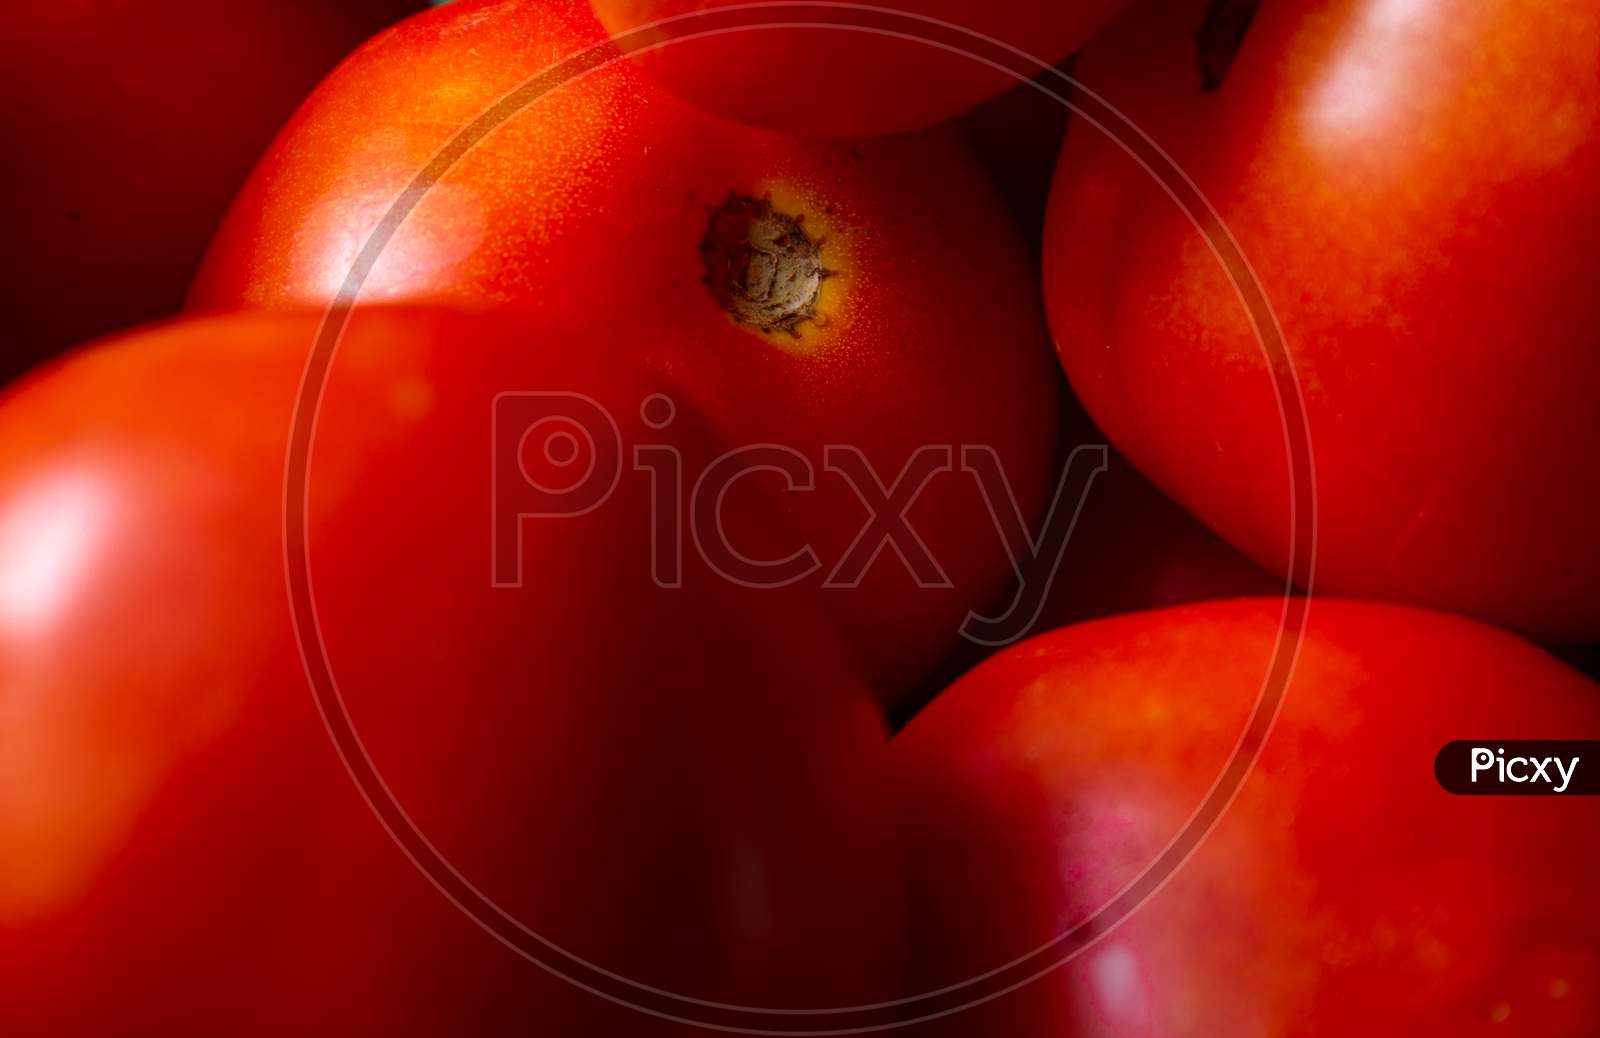 Close View Of Red Tomatoes In Heap. Fresh Red Tomato Fruit For Food Background, Food Closeup.